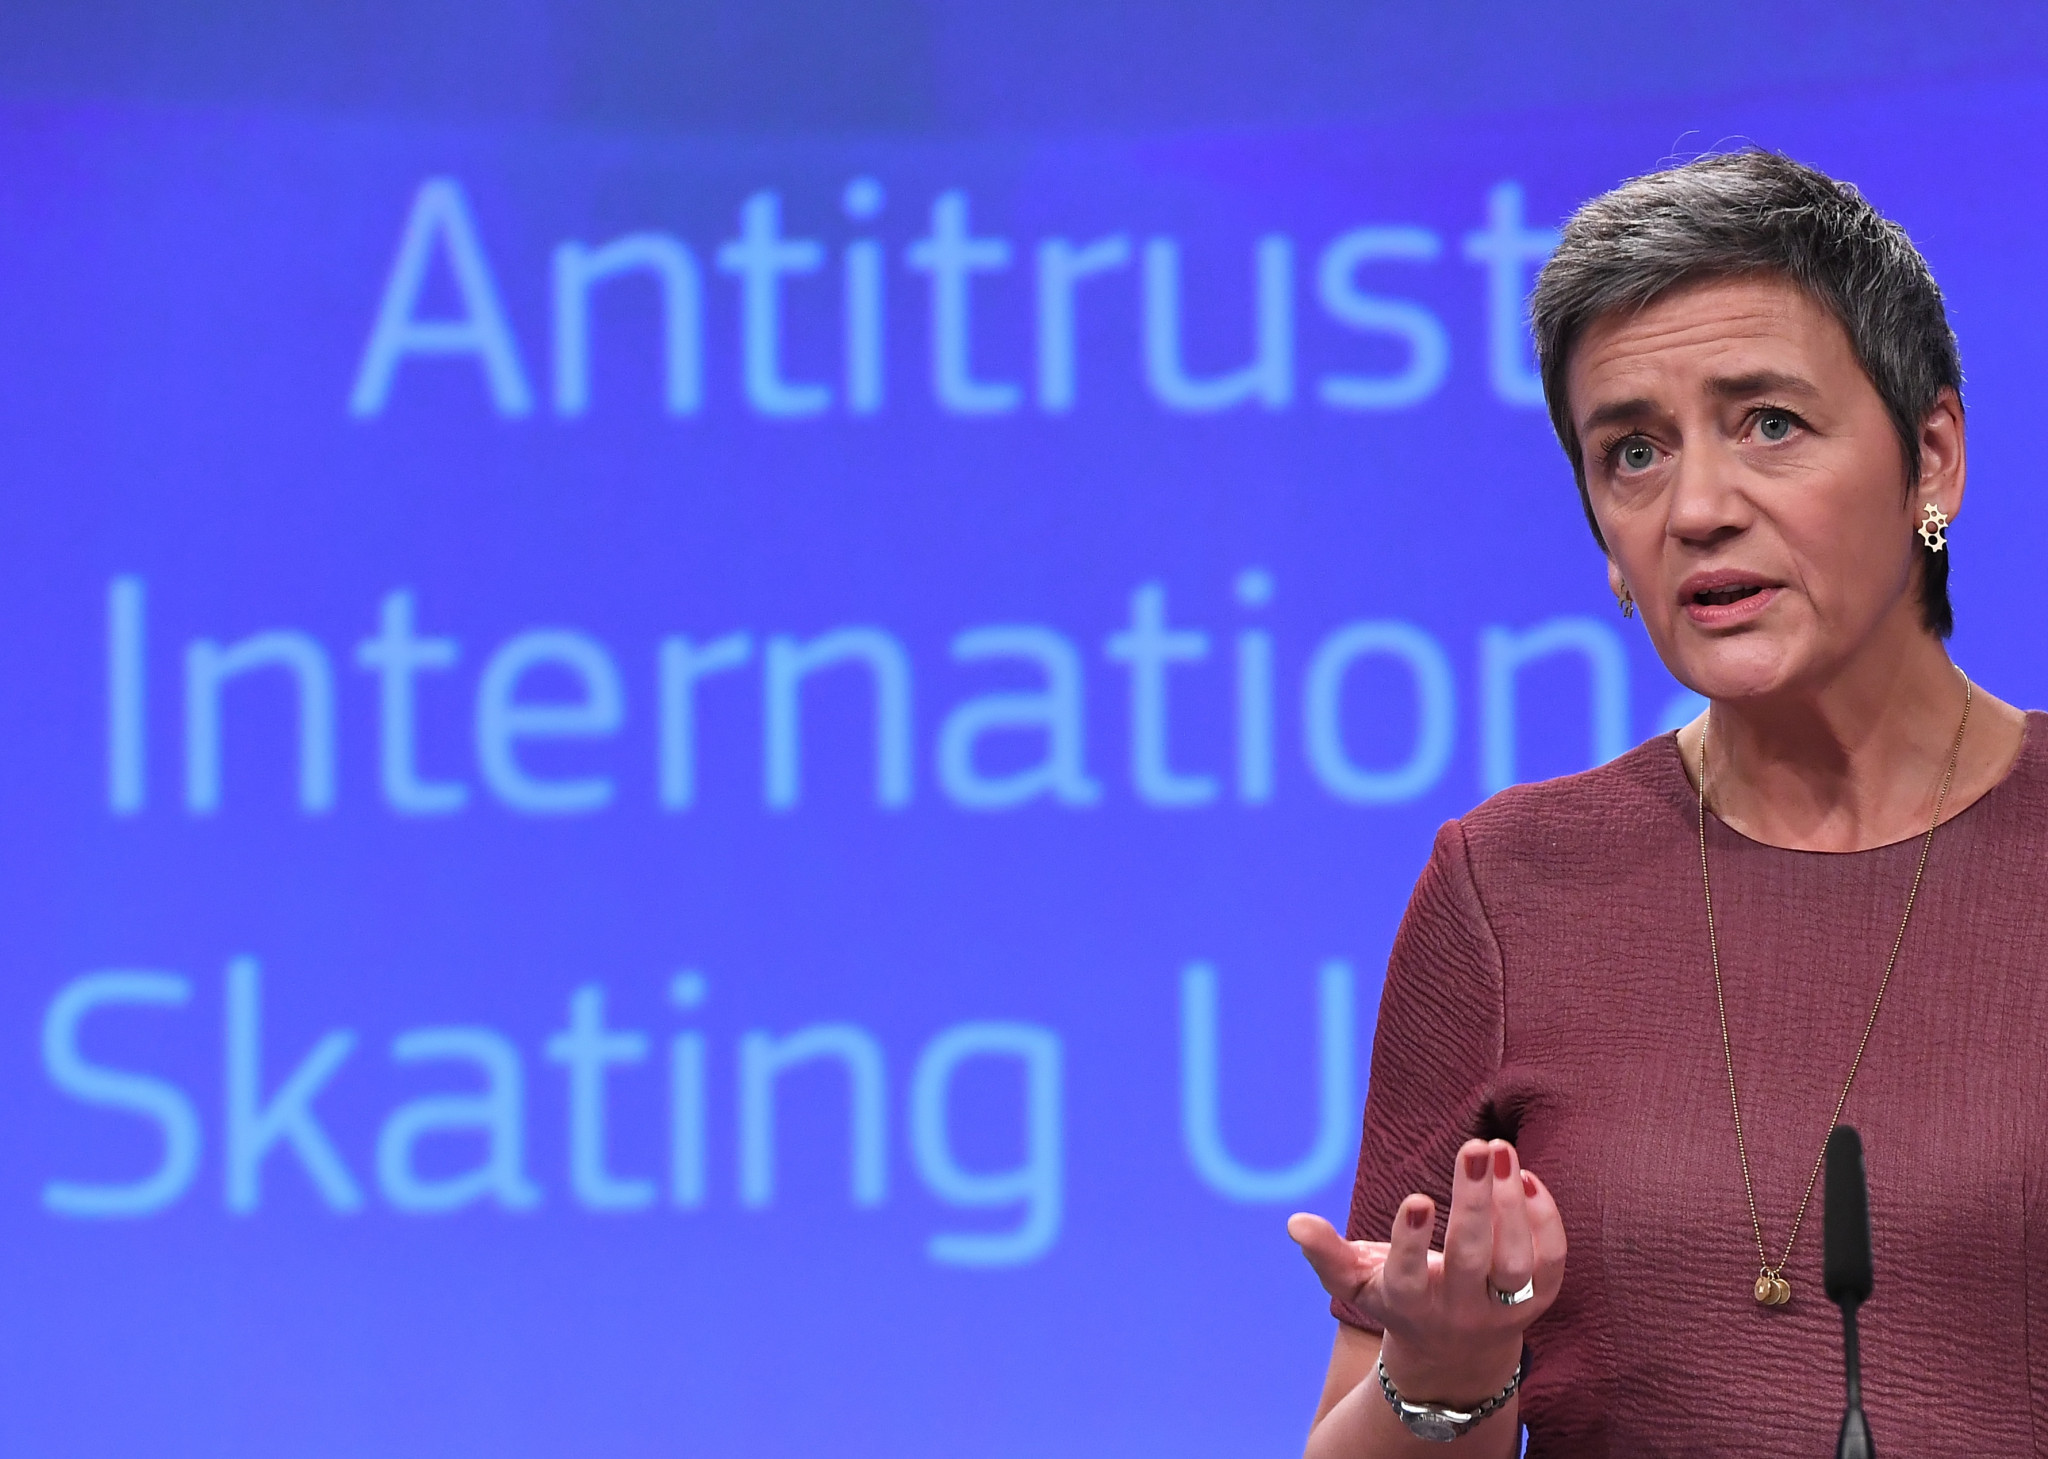 European Commissioner for Competition Margrethe Vestager addresses a press conference about the International Skating Union's (ISU) restrictive penalties on athletes which breach EU competition rules, at the European Commission in Brussels ©Getty Images